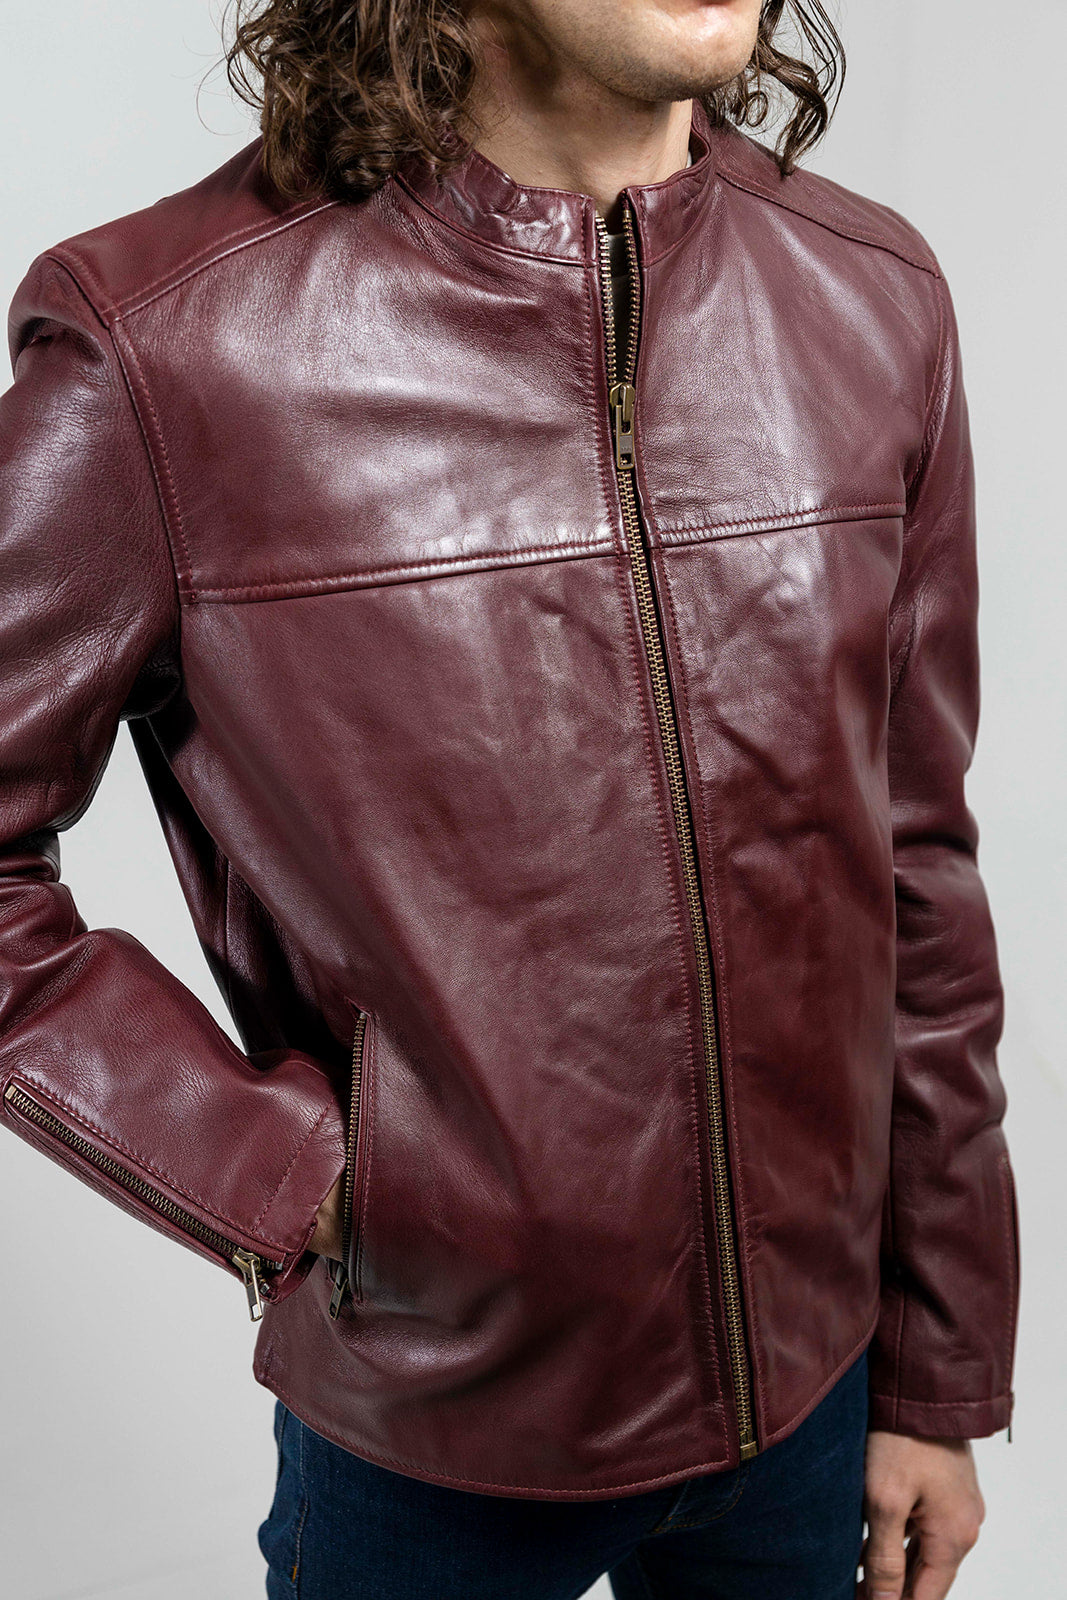 Grayson - First – Lambskin Manufacturing Leather Company Jacket (Oxblood) Men\'s Fashion